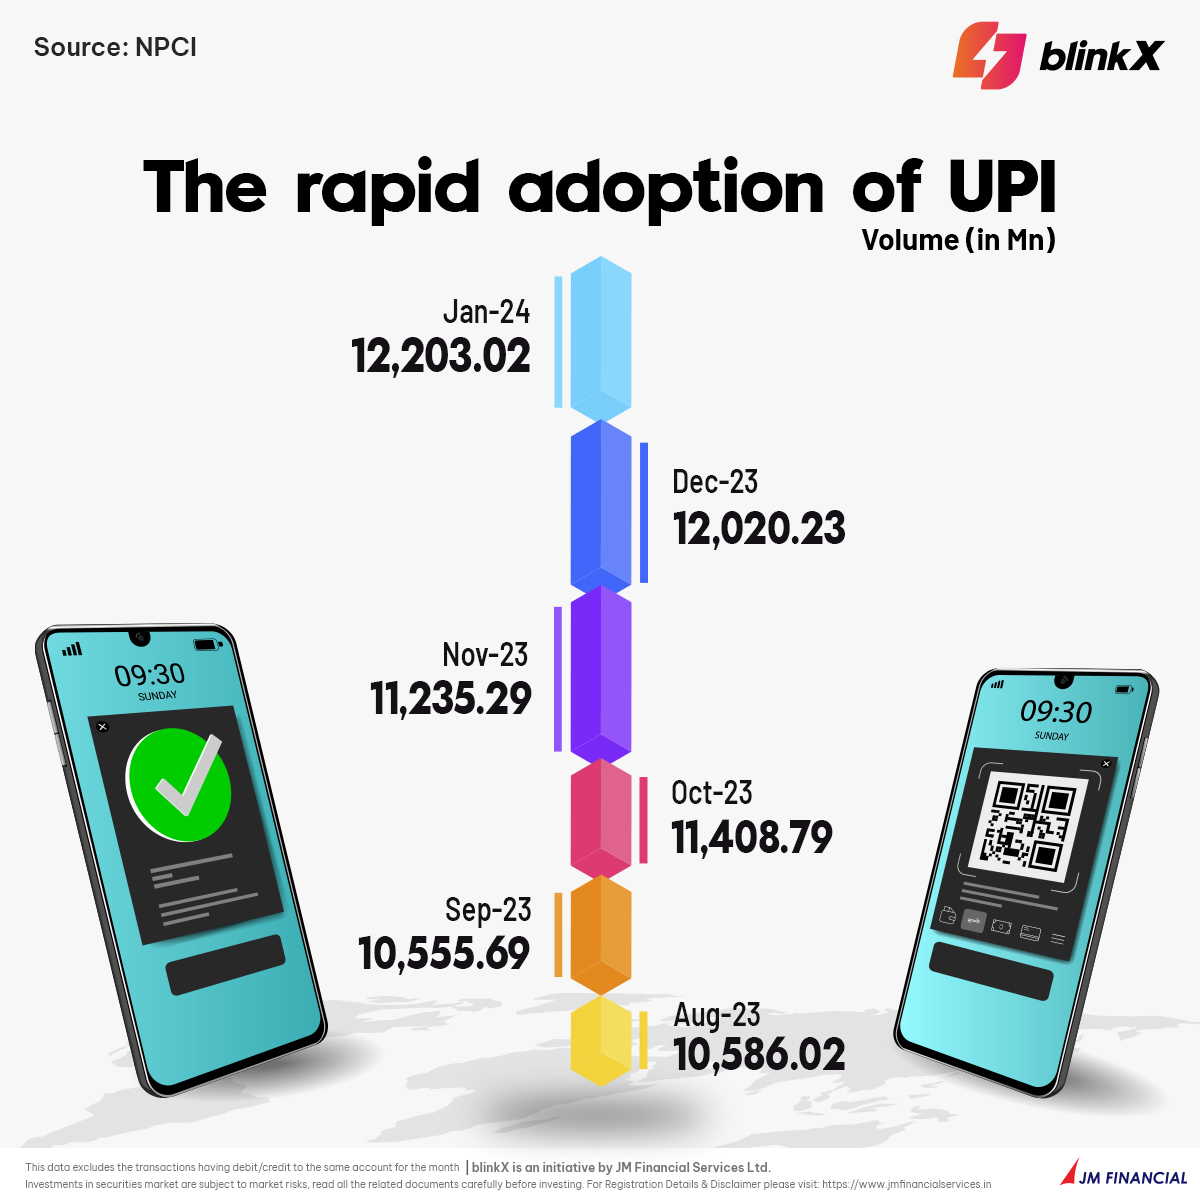 UPI on the rise! From ₹1 lakh crore in FY 2017-18 to ₹139 trillion in FY 2022-23, UPI transactions have grown exponentially.

#upi #NPCI #onlinepayment #transaction #banks #money #moneytransfer #markets #stockmarket #investor #investment #investments #finance #research